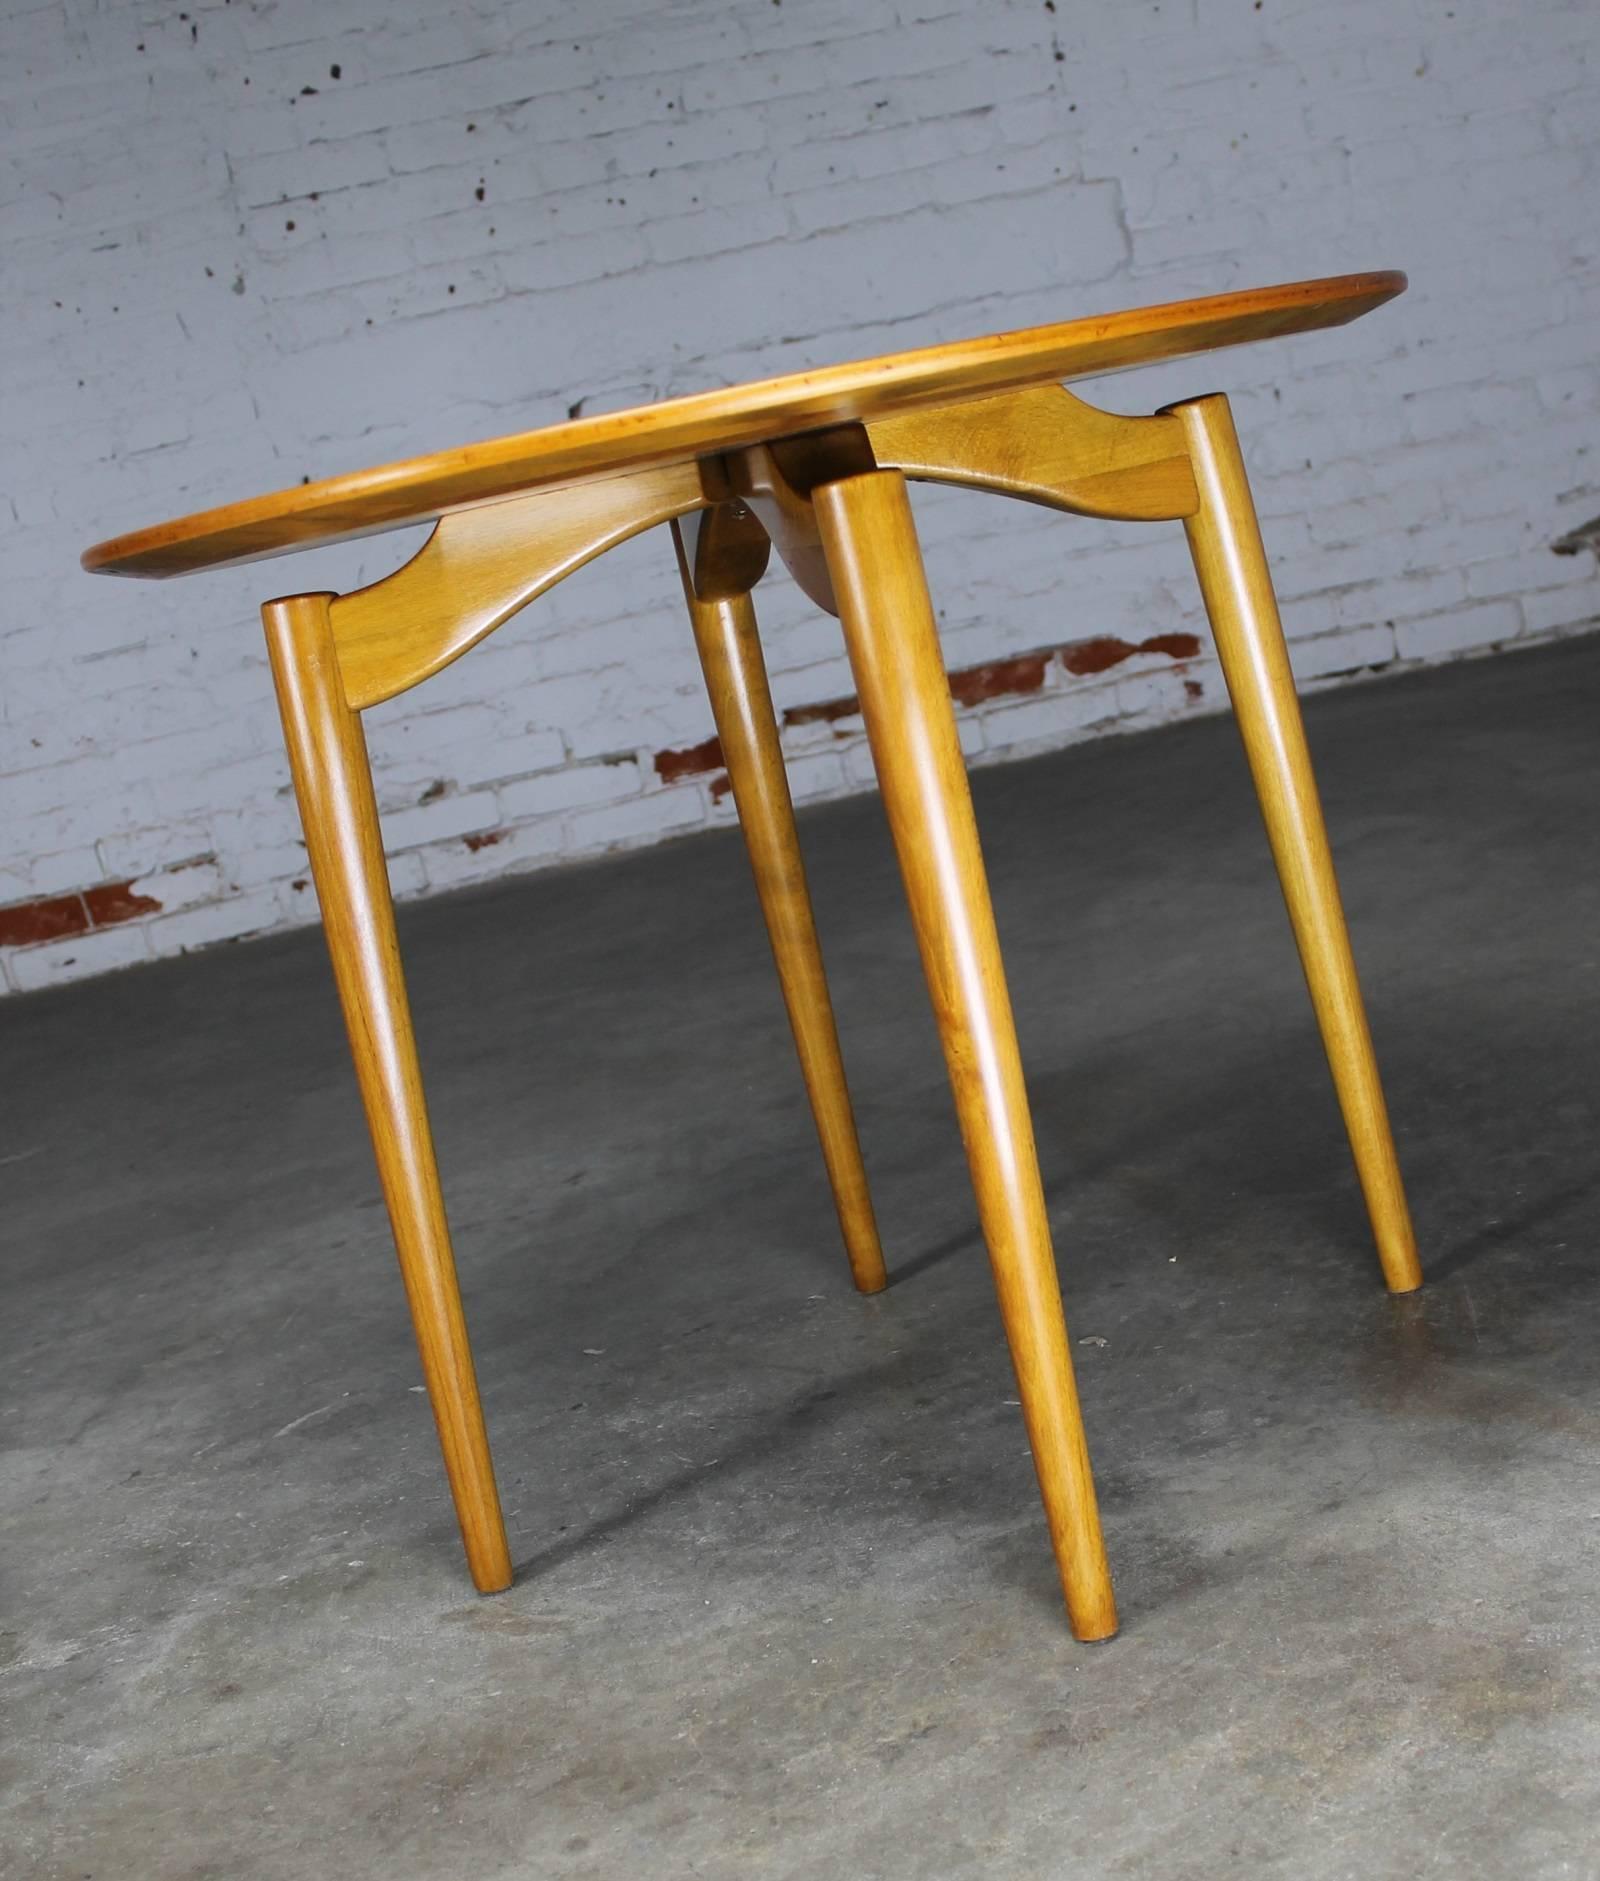 Simple yet striking vintage Mid-Century Danish Modern round teak side table attributed to Grete Jalk and produced by P. Jeppesen Mobelfabrik A/S. In fabulous vintage condition and circa 1960.

This incredible and unusual round side table is